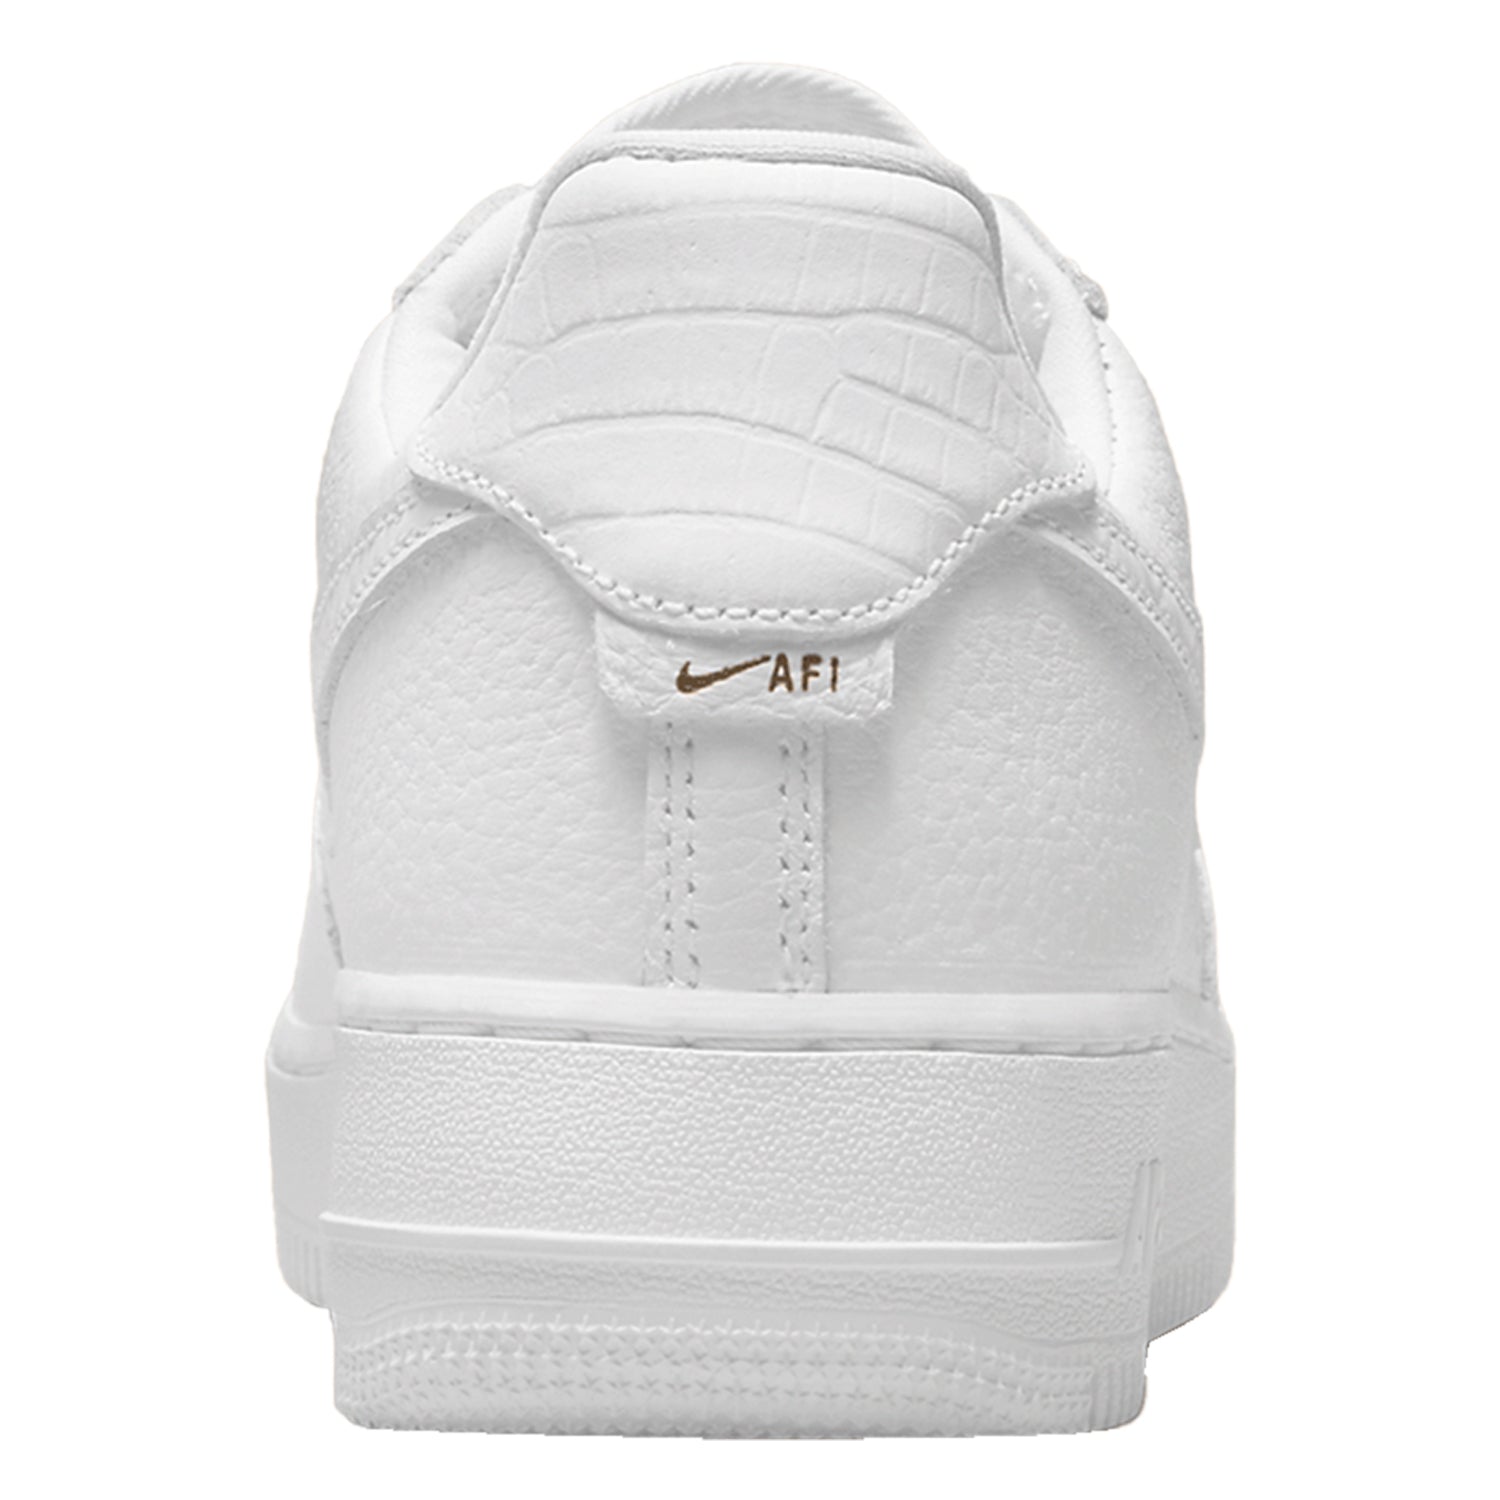 Nike Air Force 1 Low '07 Craft Quadruple White